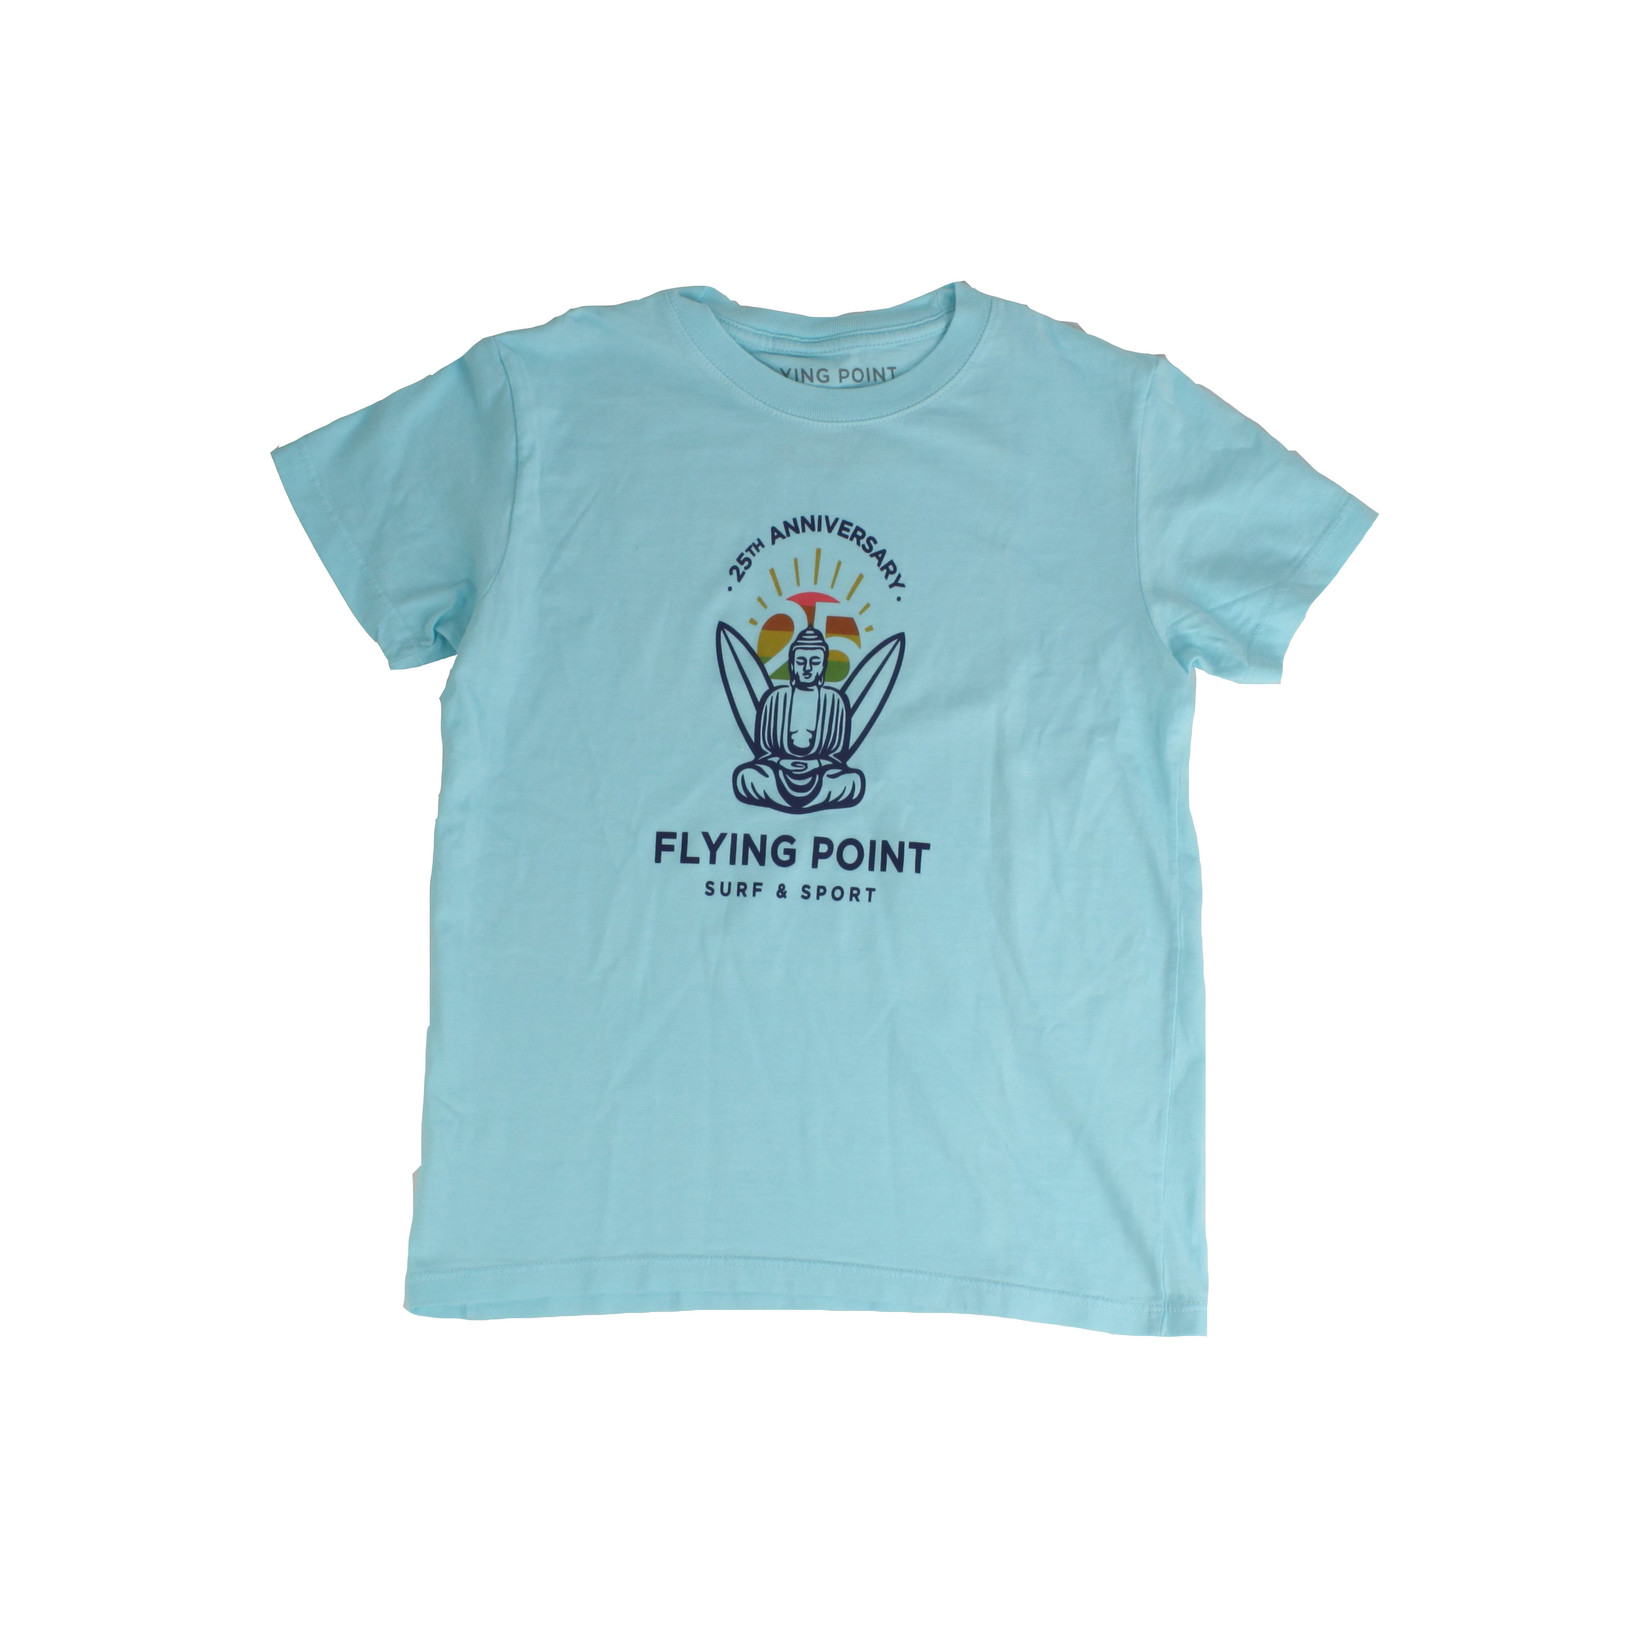 Flying Point 25th Anniversary Youth Tee